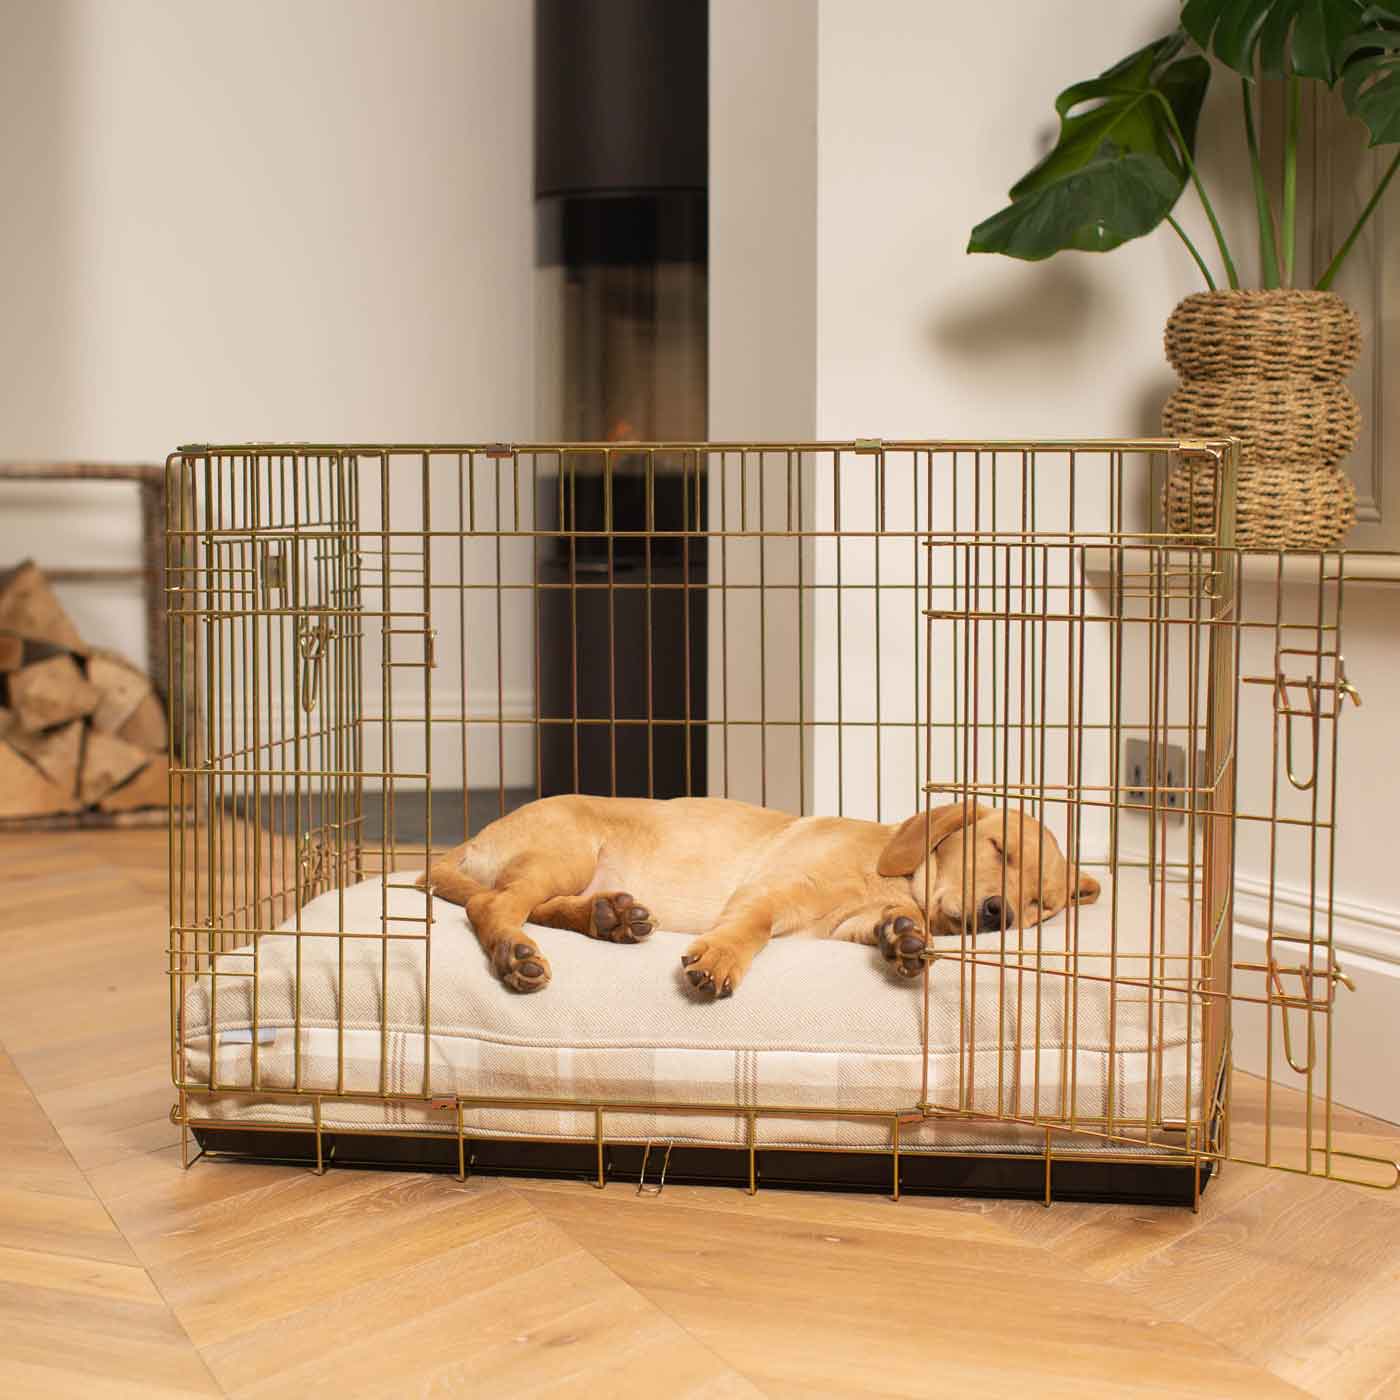 Luxury Gold Dog Cage Set With Cushion, The Perfect Dog Cage For The Ultimate Naptime, Now Available To Personalize at Lords & Labradors US